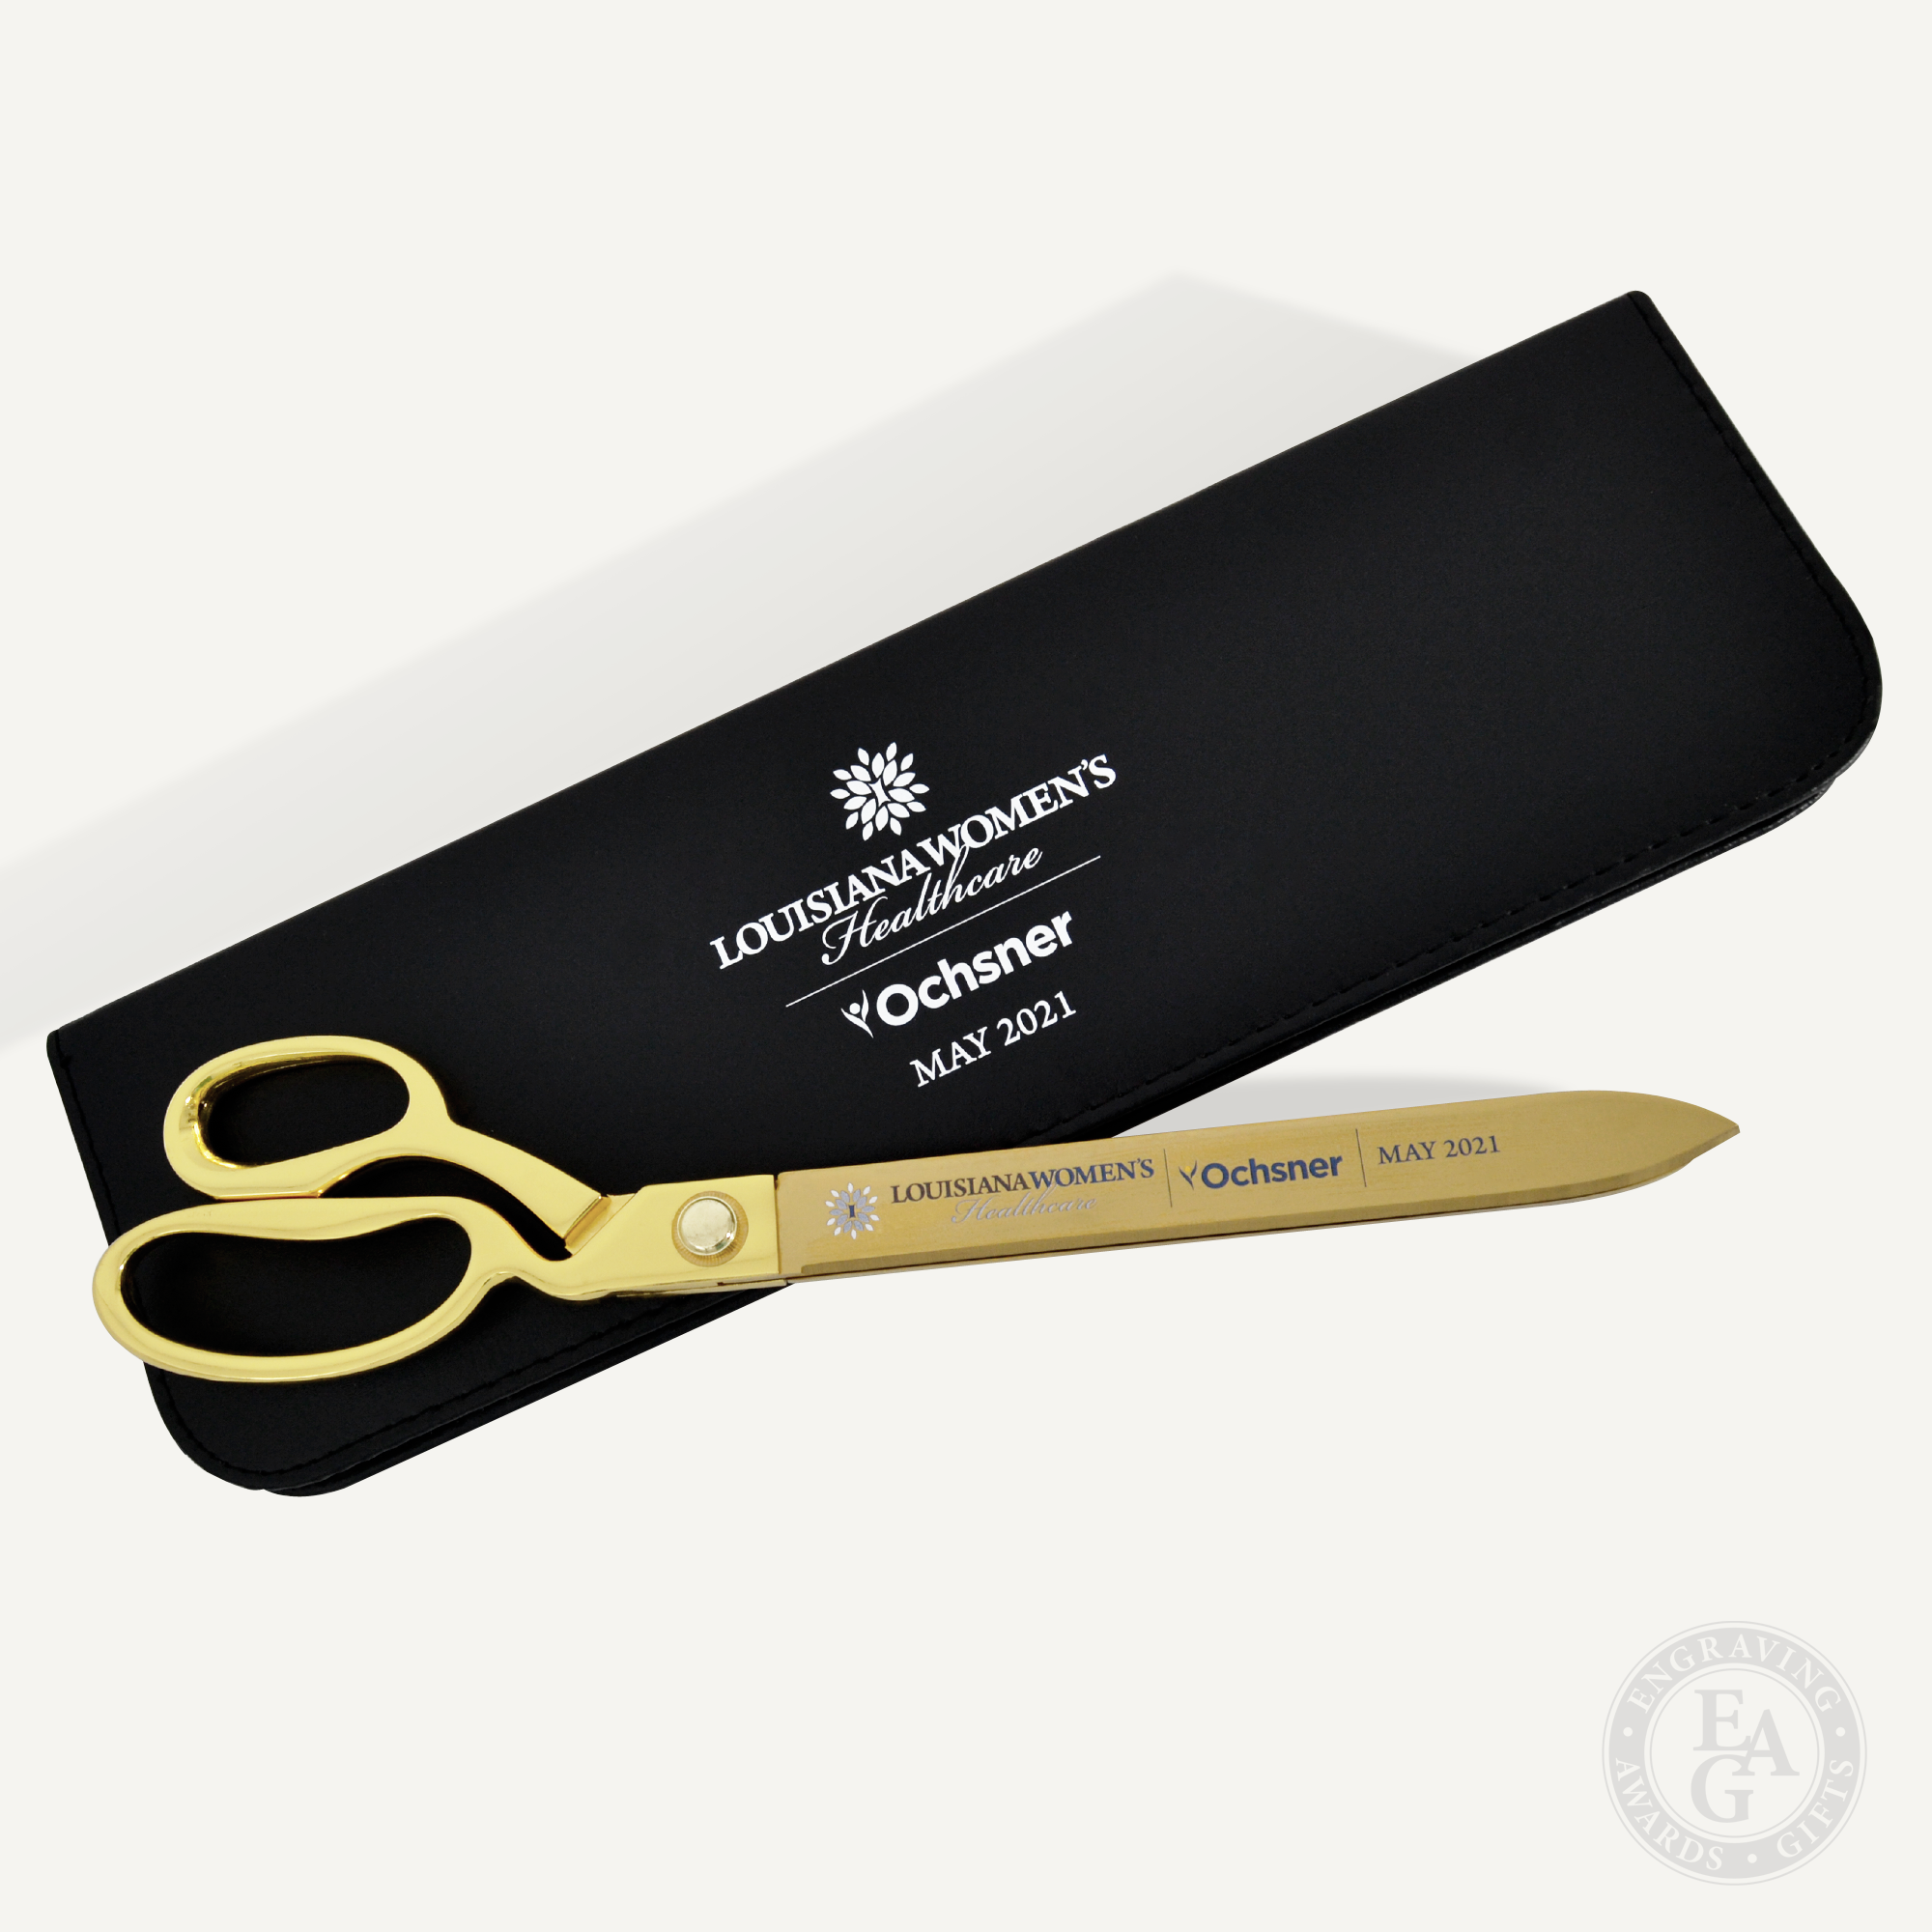 20 Gold Scissors for Grand Opening – Gold Giants Ribbon Cutting Scissors  for Special Events Inaugurations and Ceremonies Giant Scissors for Ribbon